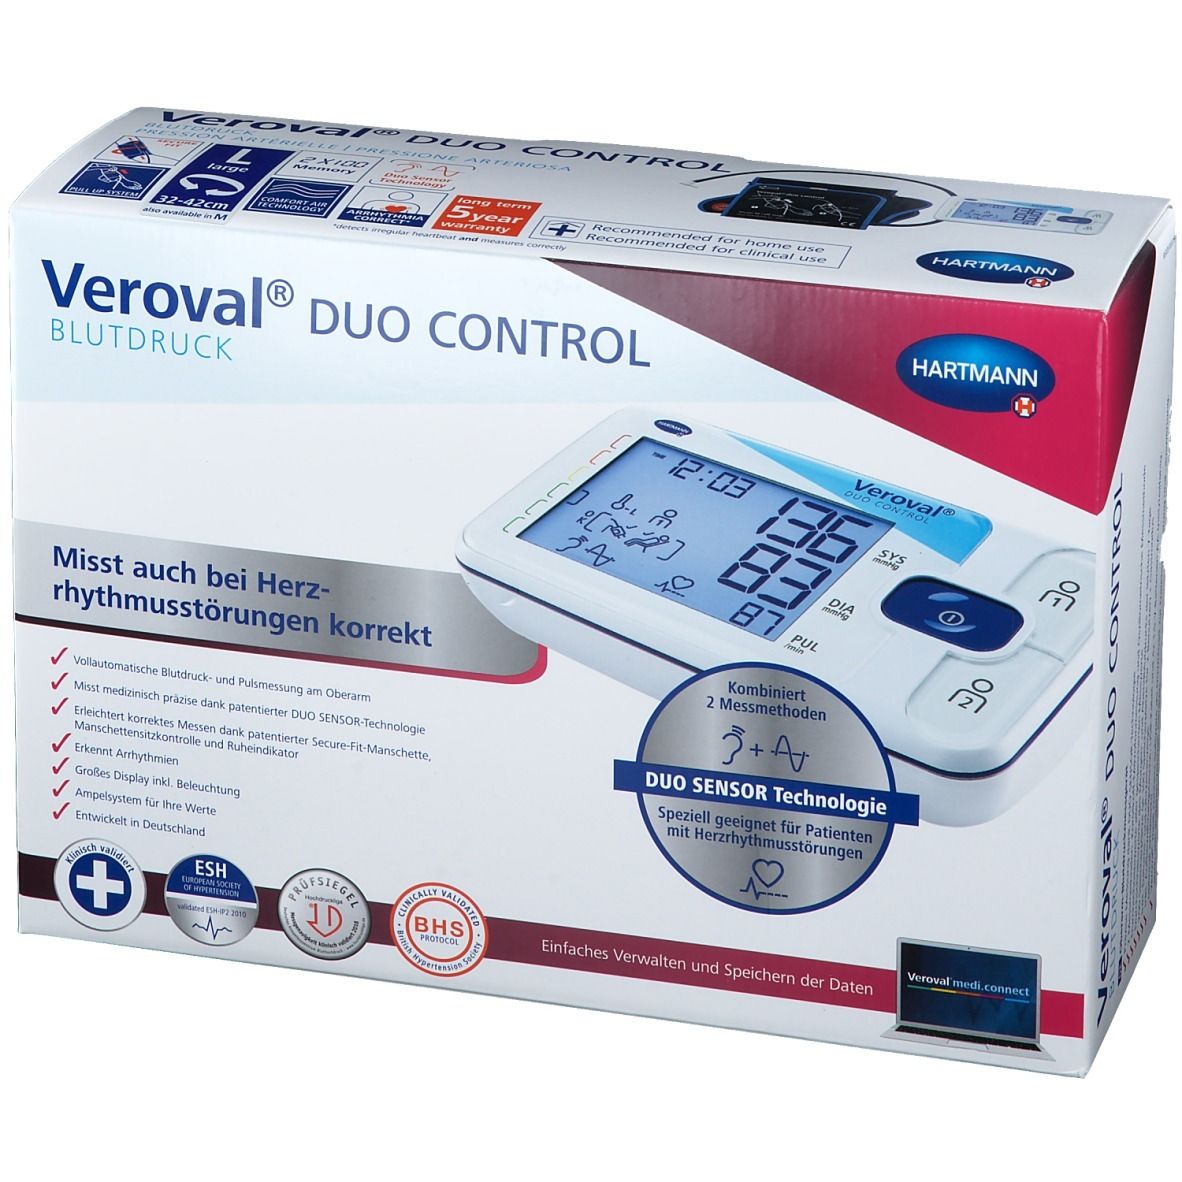 Veroval® DUO CONTROL large